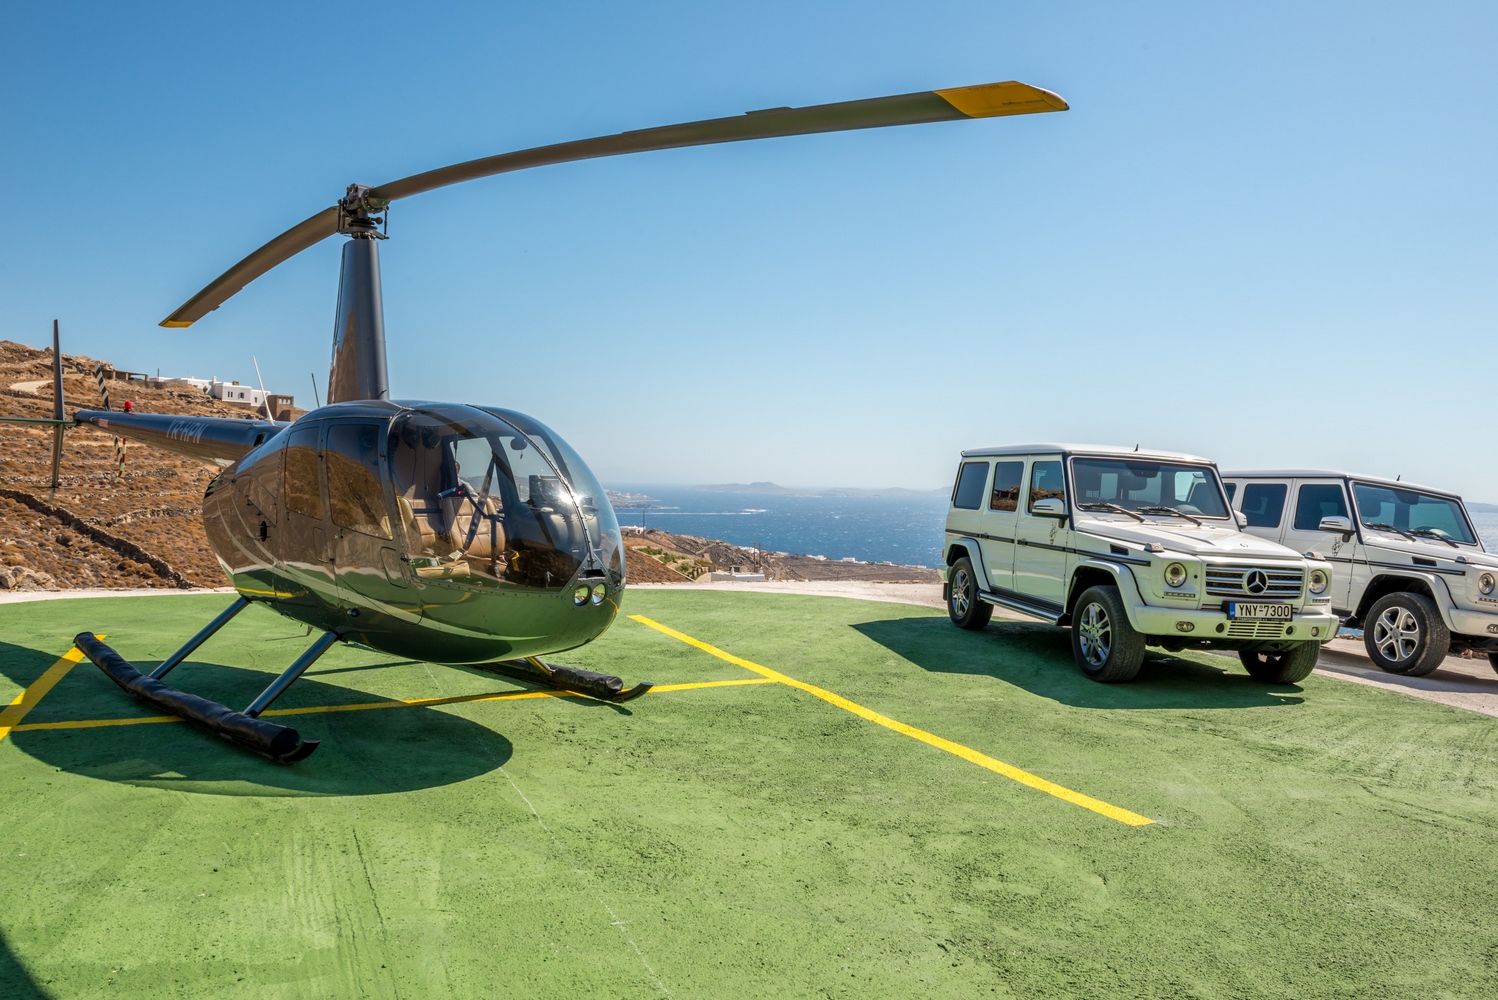 Cars and a helicopter on a helipad